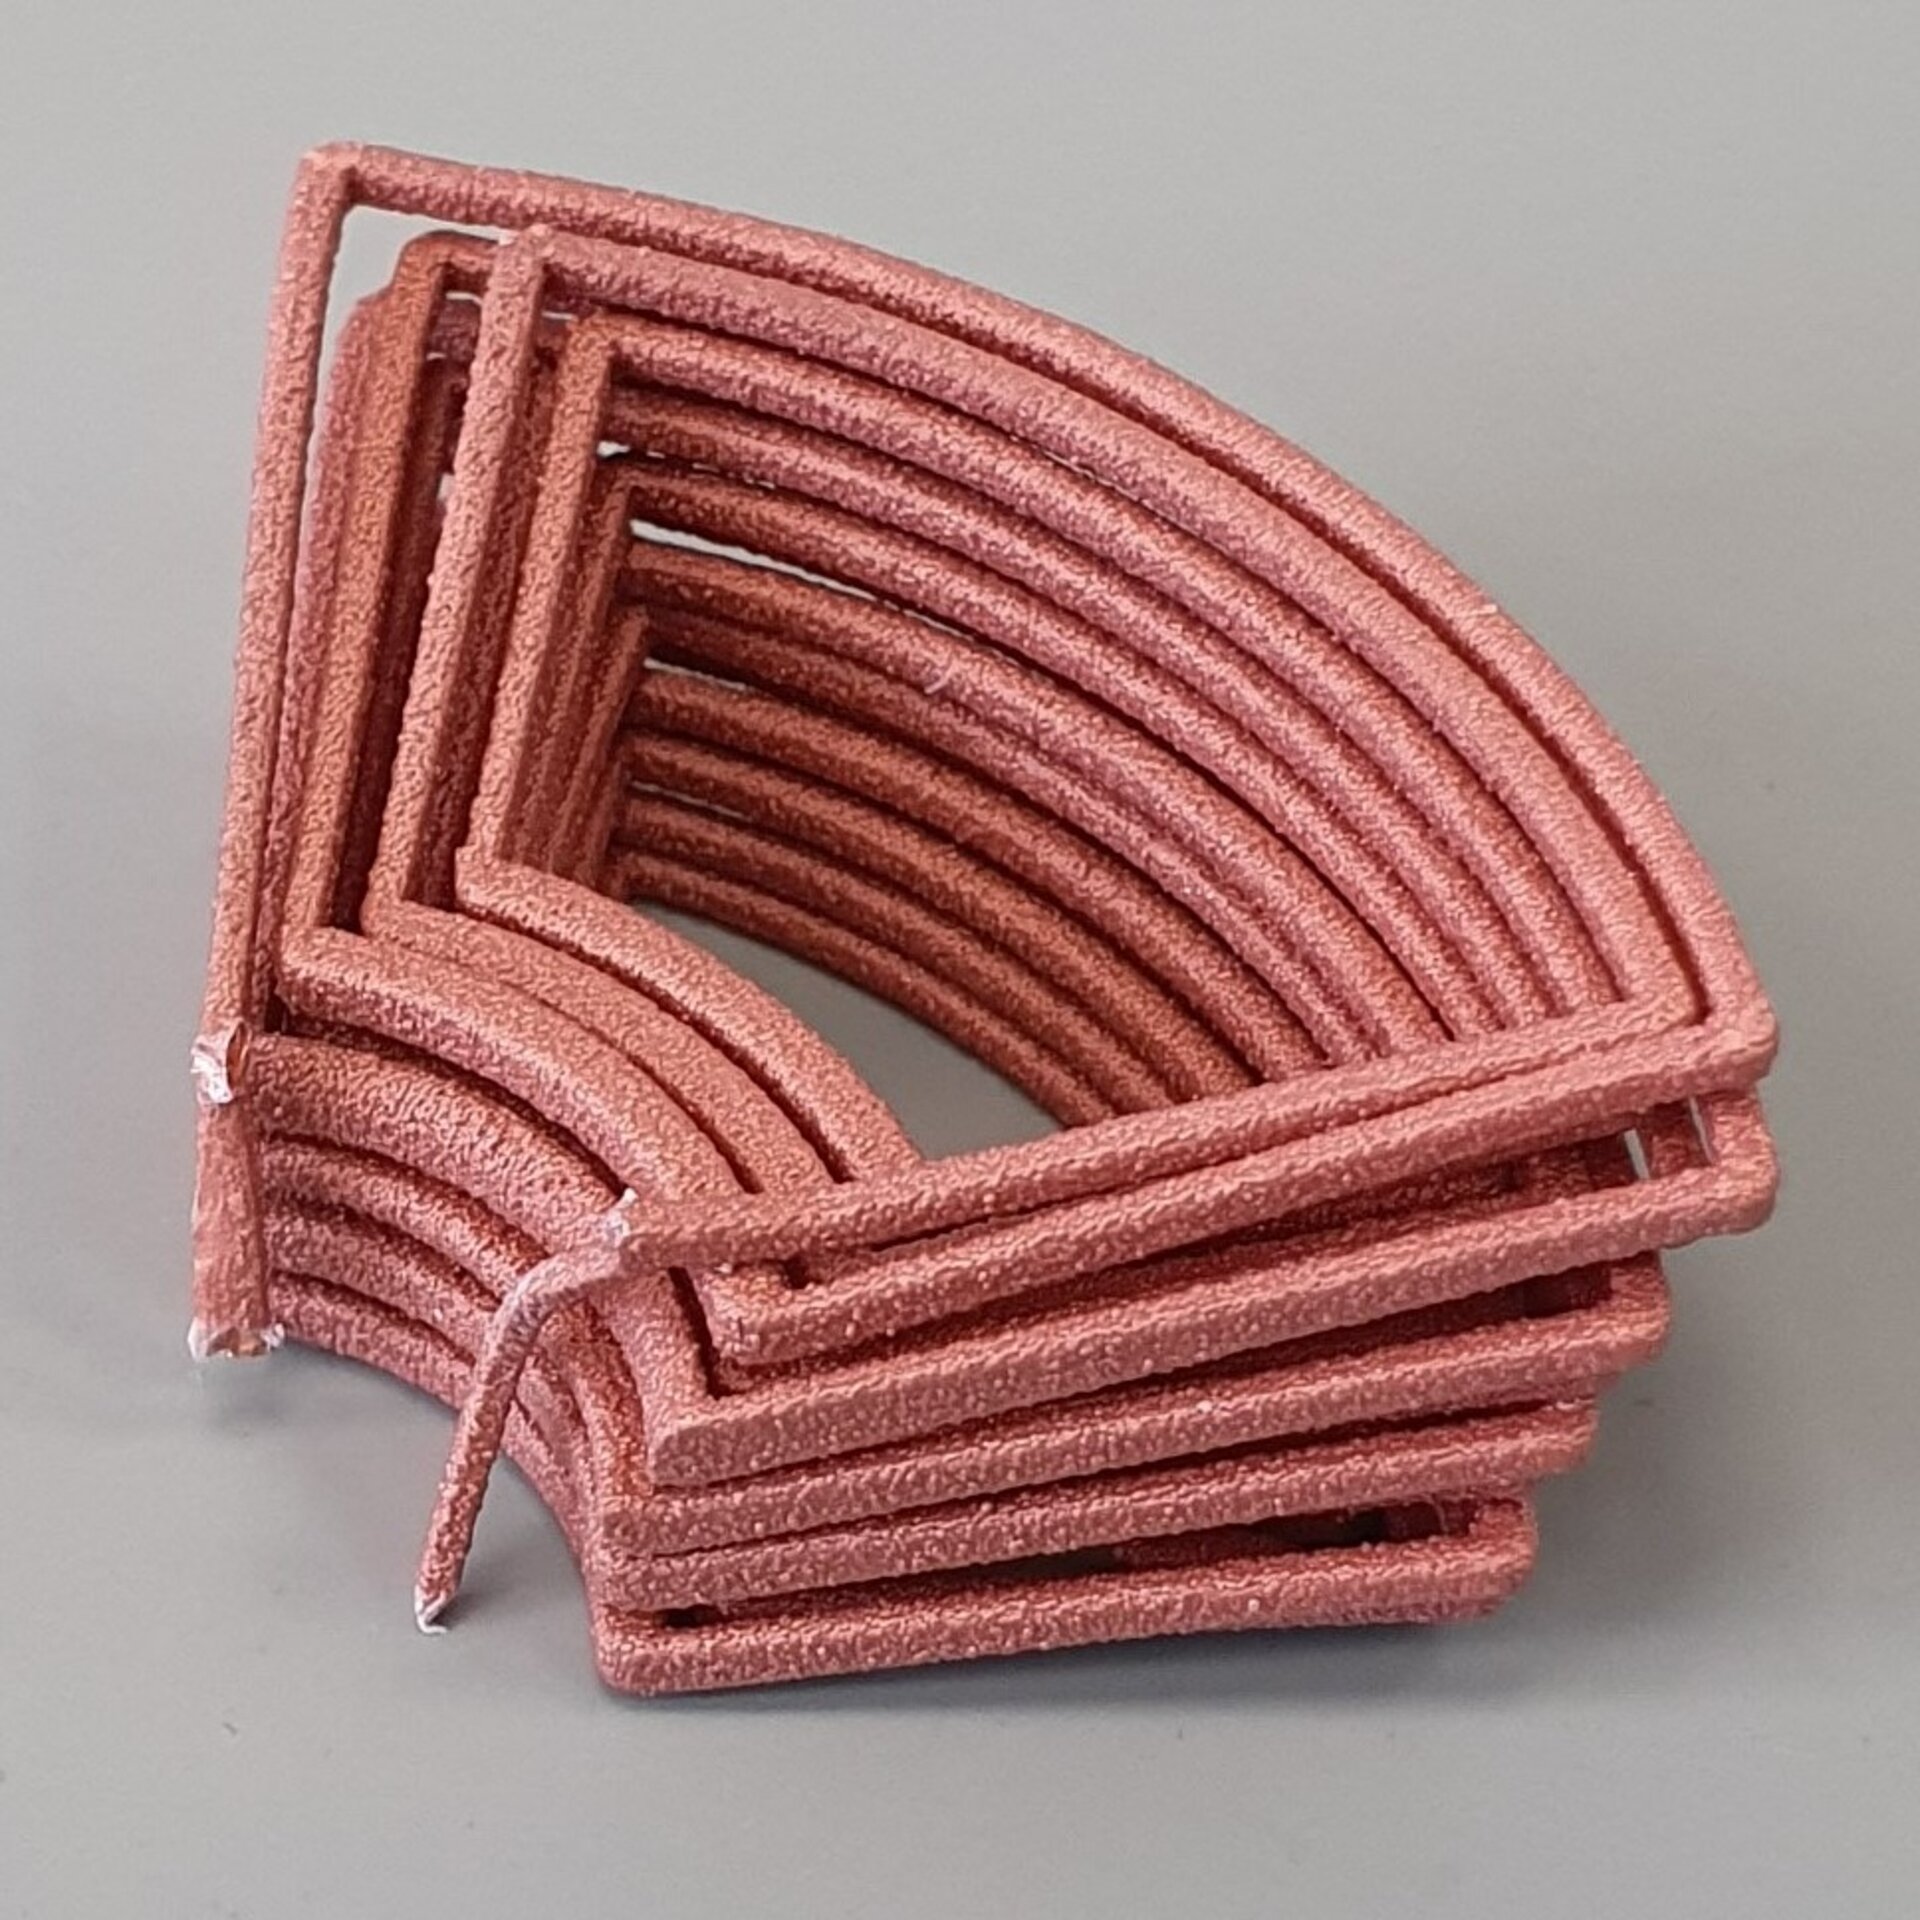 Additive Manufacturing of Pure Copper Electromagnetic Coils (CCAMA)